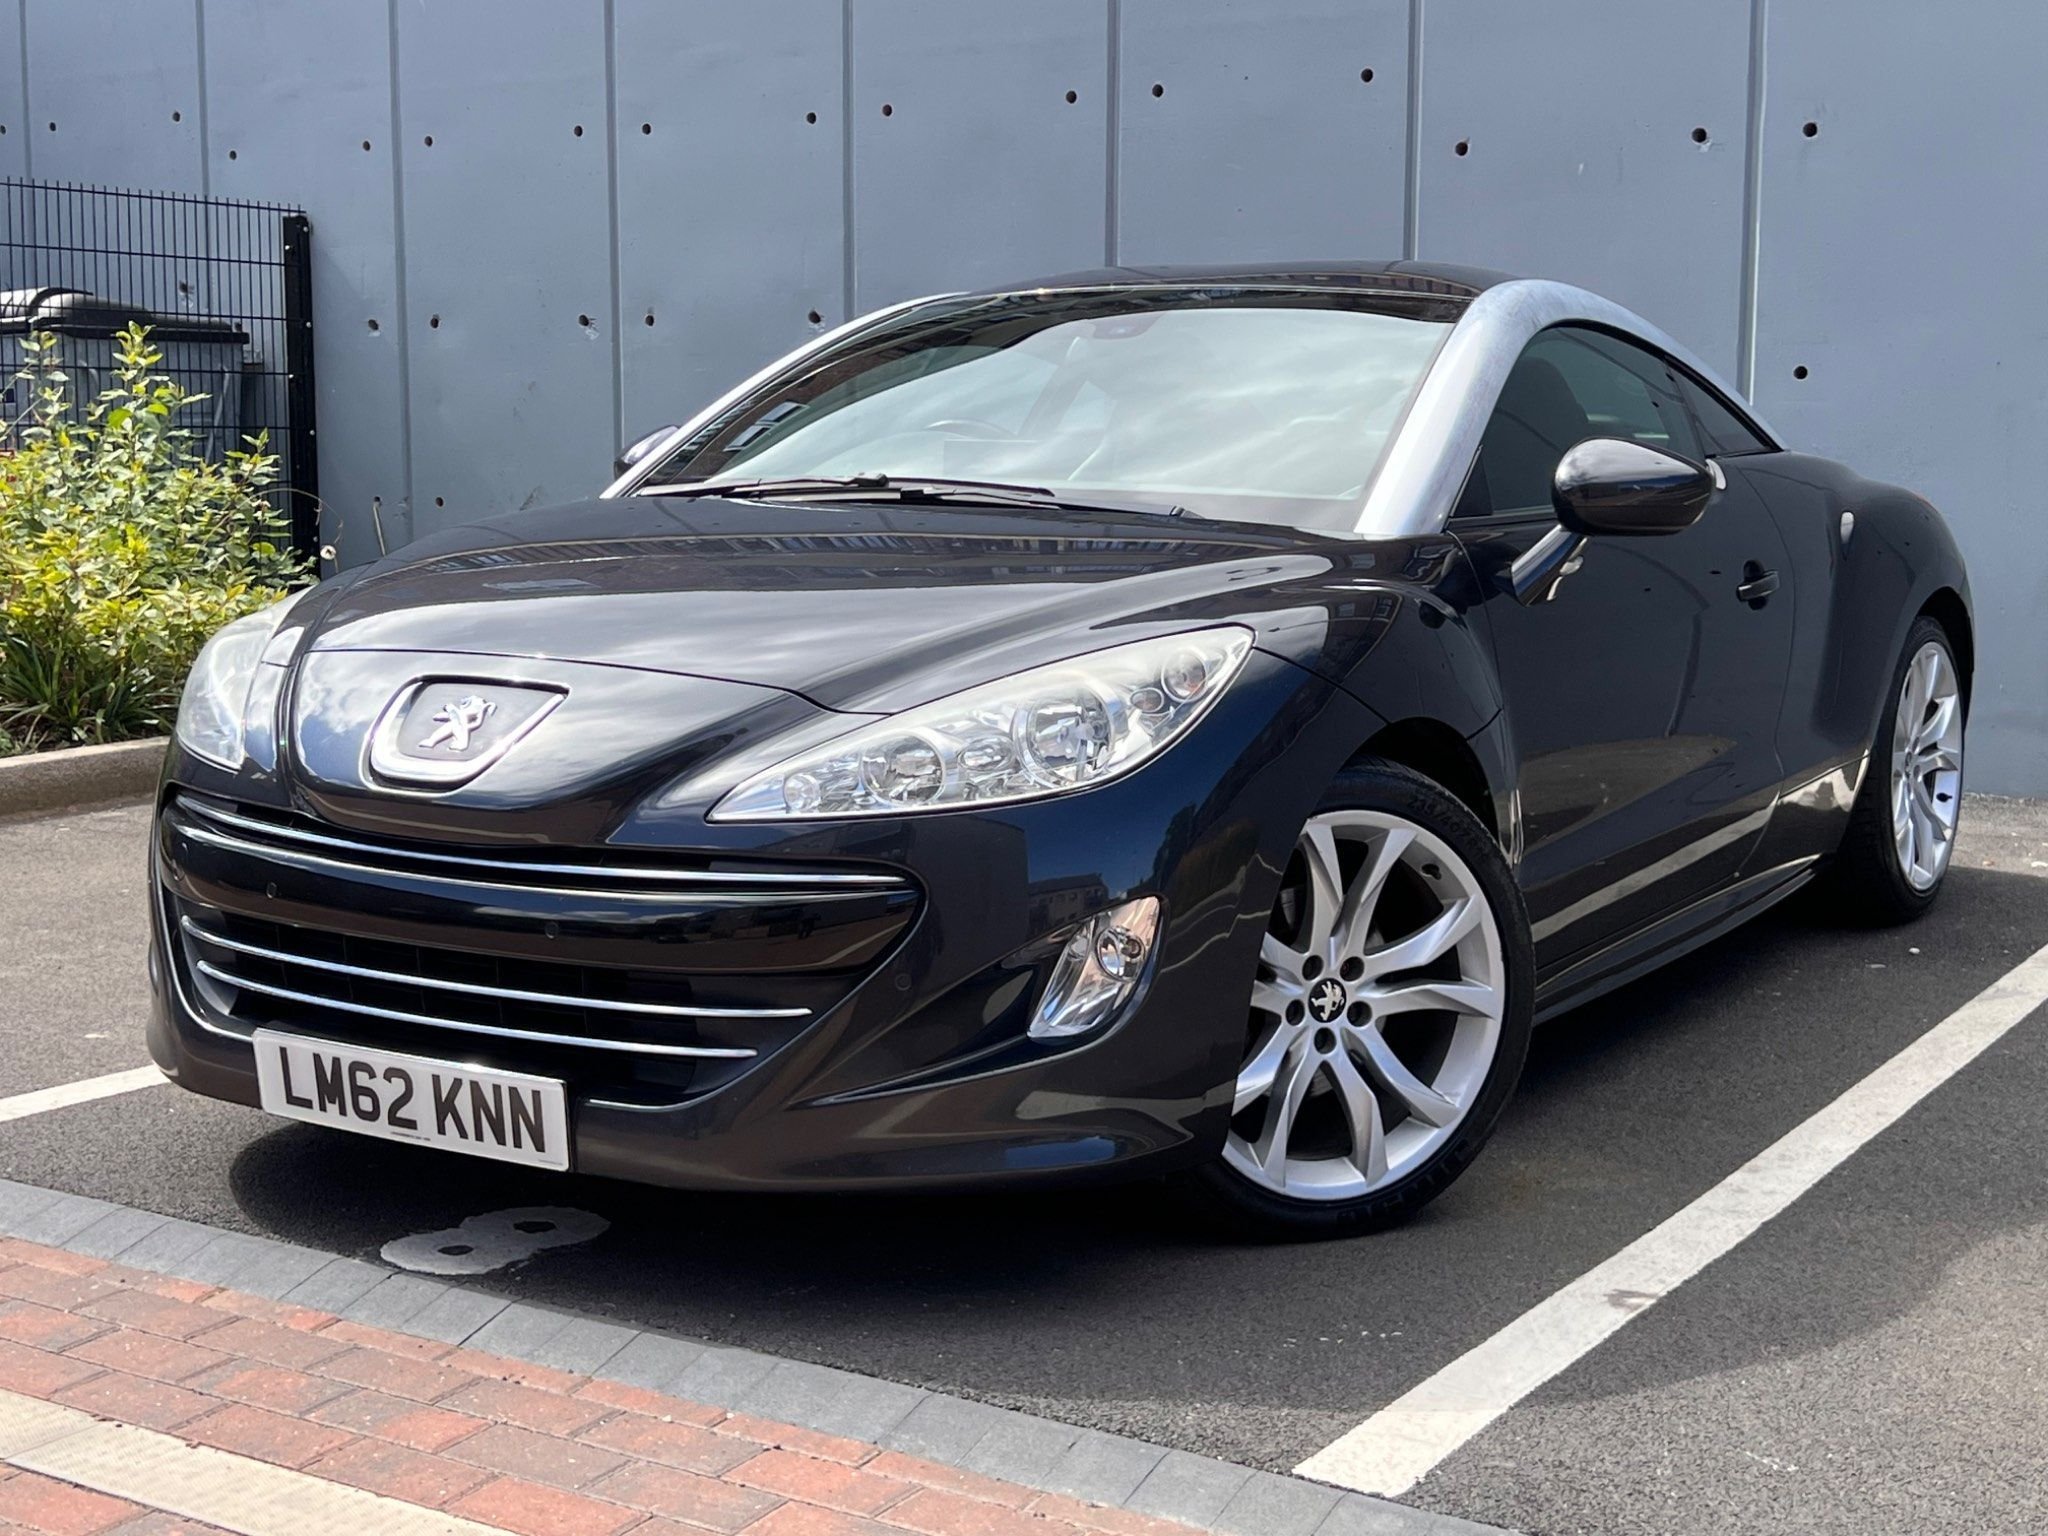 Used Peugeot Rcz Coupe 1.6 Thp Gt Euro 5 2dr in Mexborough, South